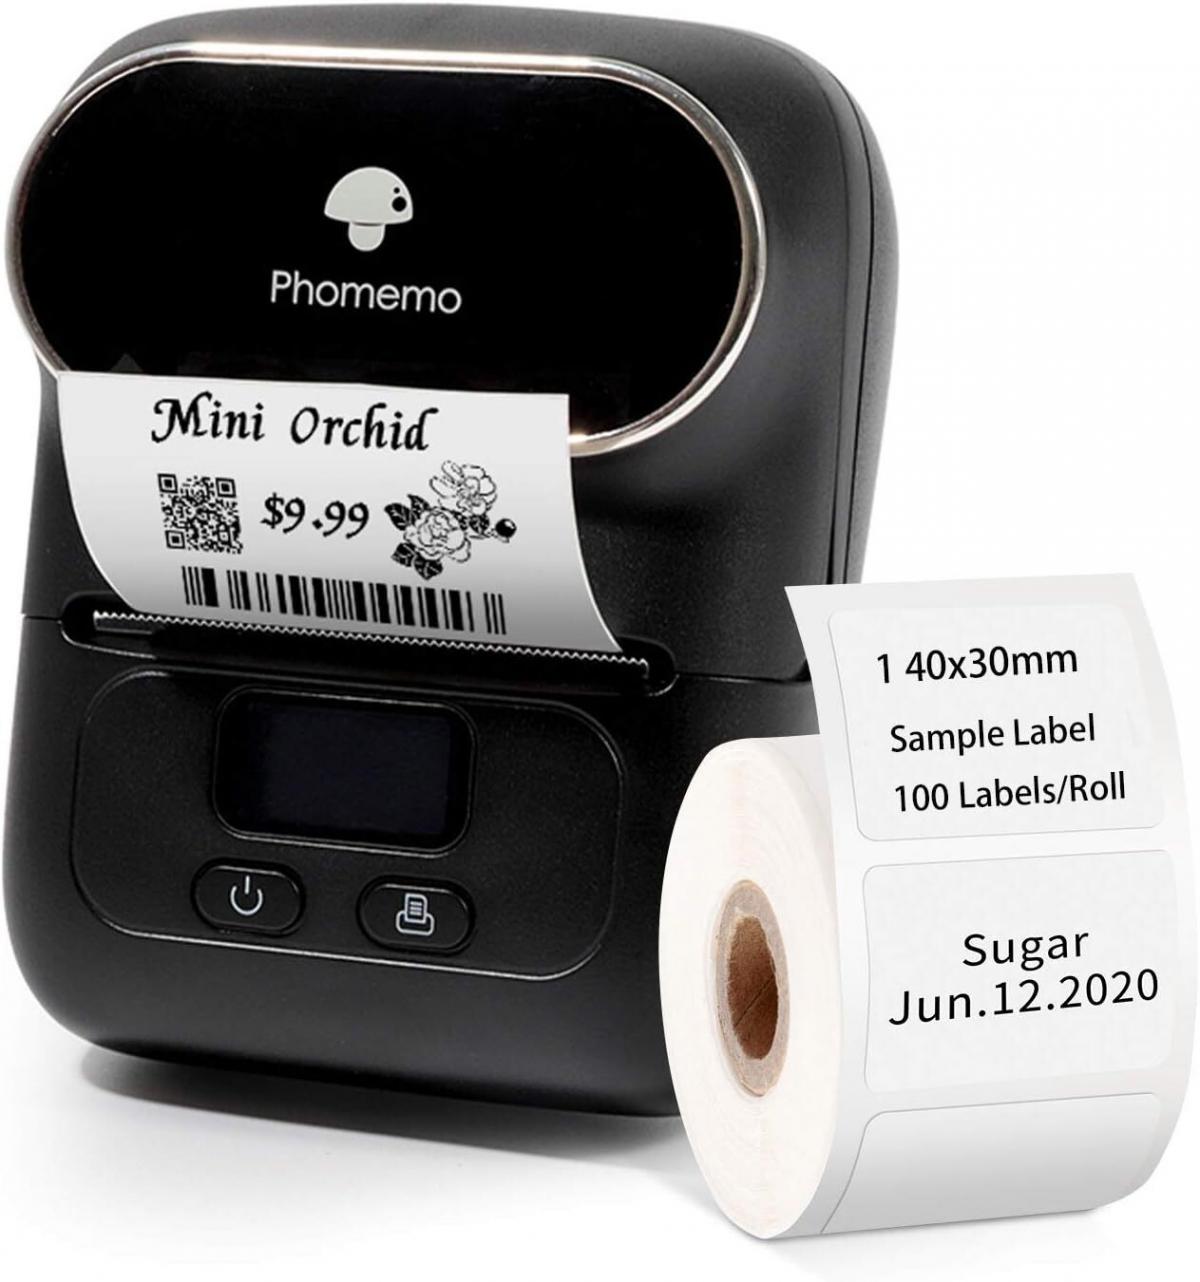 Phomemo M110 Bluetooth Portable Thermal Printer for Cell Phones and Computers